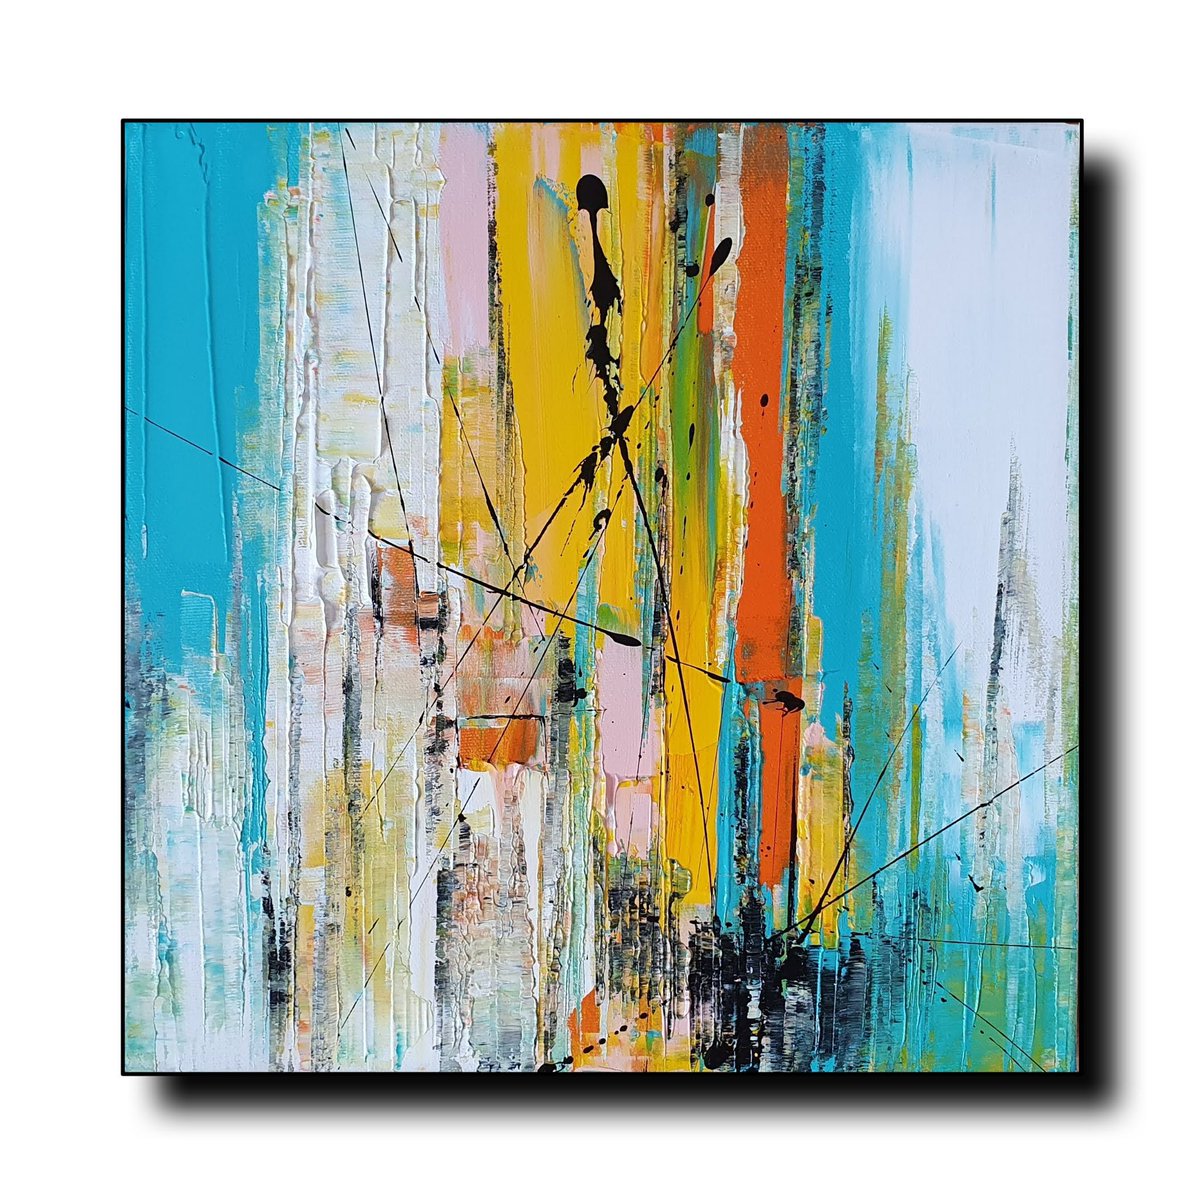 “Shelter”

Medium – Acrylic on Canvas
Size – 12×12 
Available type – Ready to Hang
.
.
.
.
#colourful 
#art
#paintings 
#instagram 
#acrylic
#abstract
#abstractpainting 
#acrylicpainting 
#arttoronto 
#markhamartist 
#artlovers 
#abstractlovers 
#abstraction 
#abstractartist